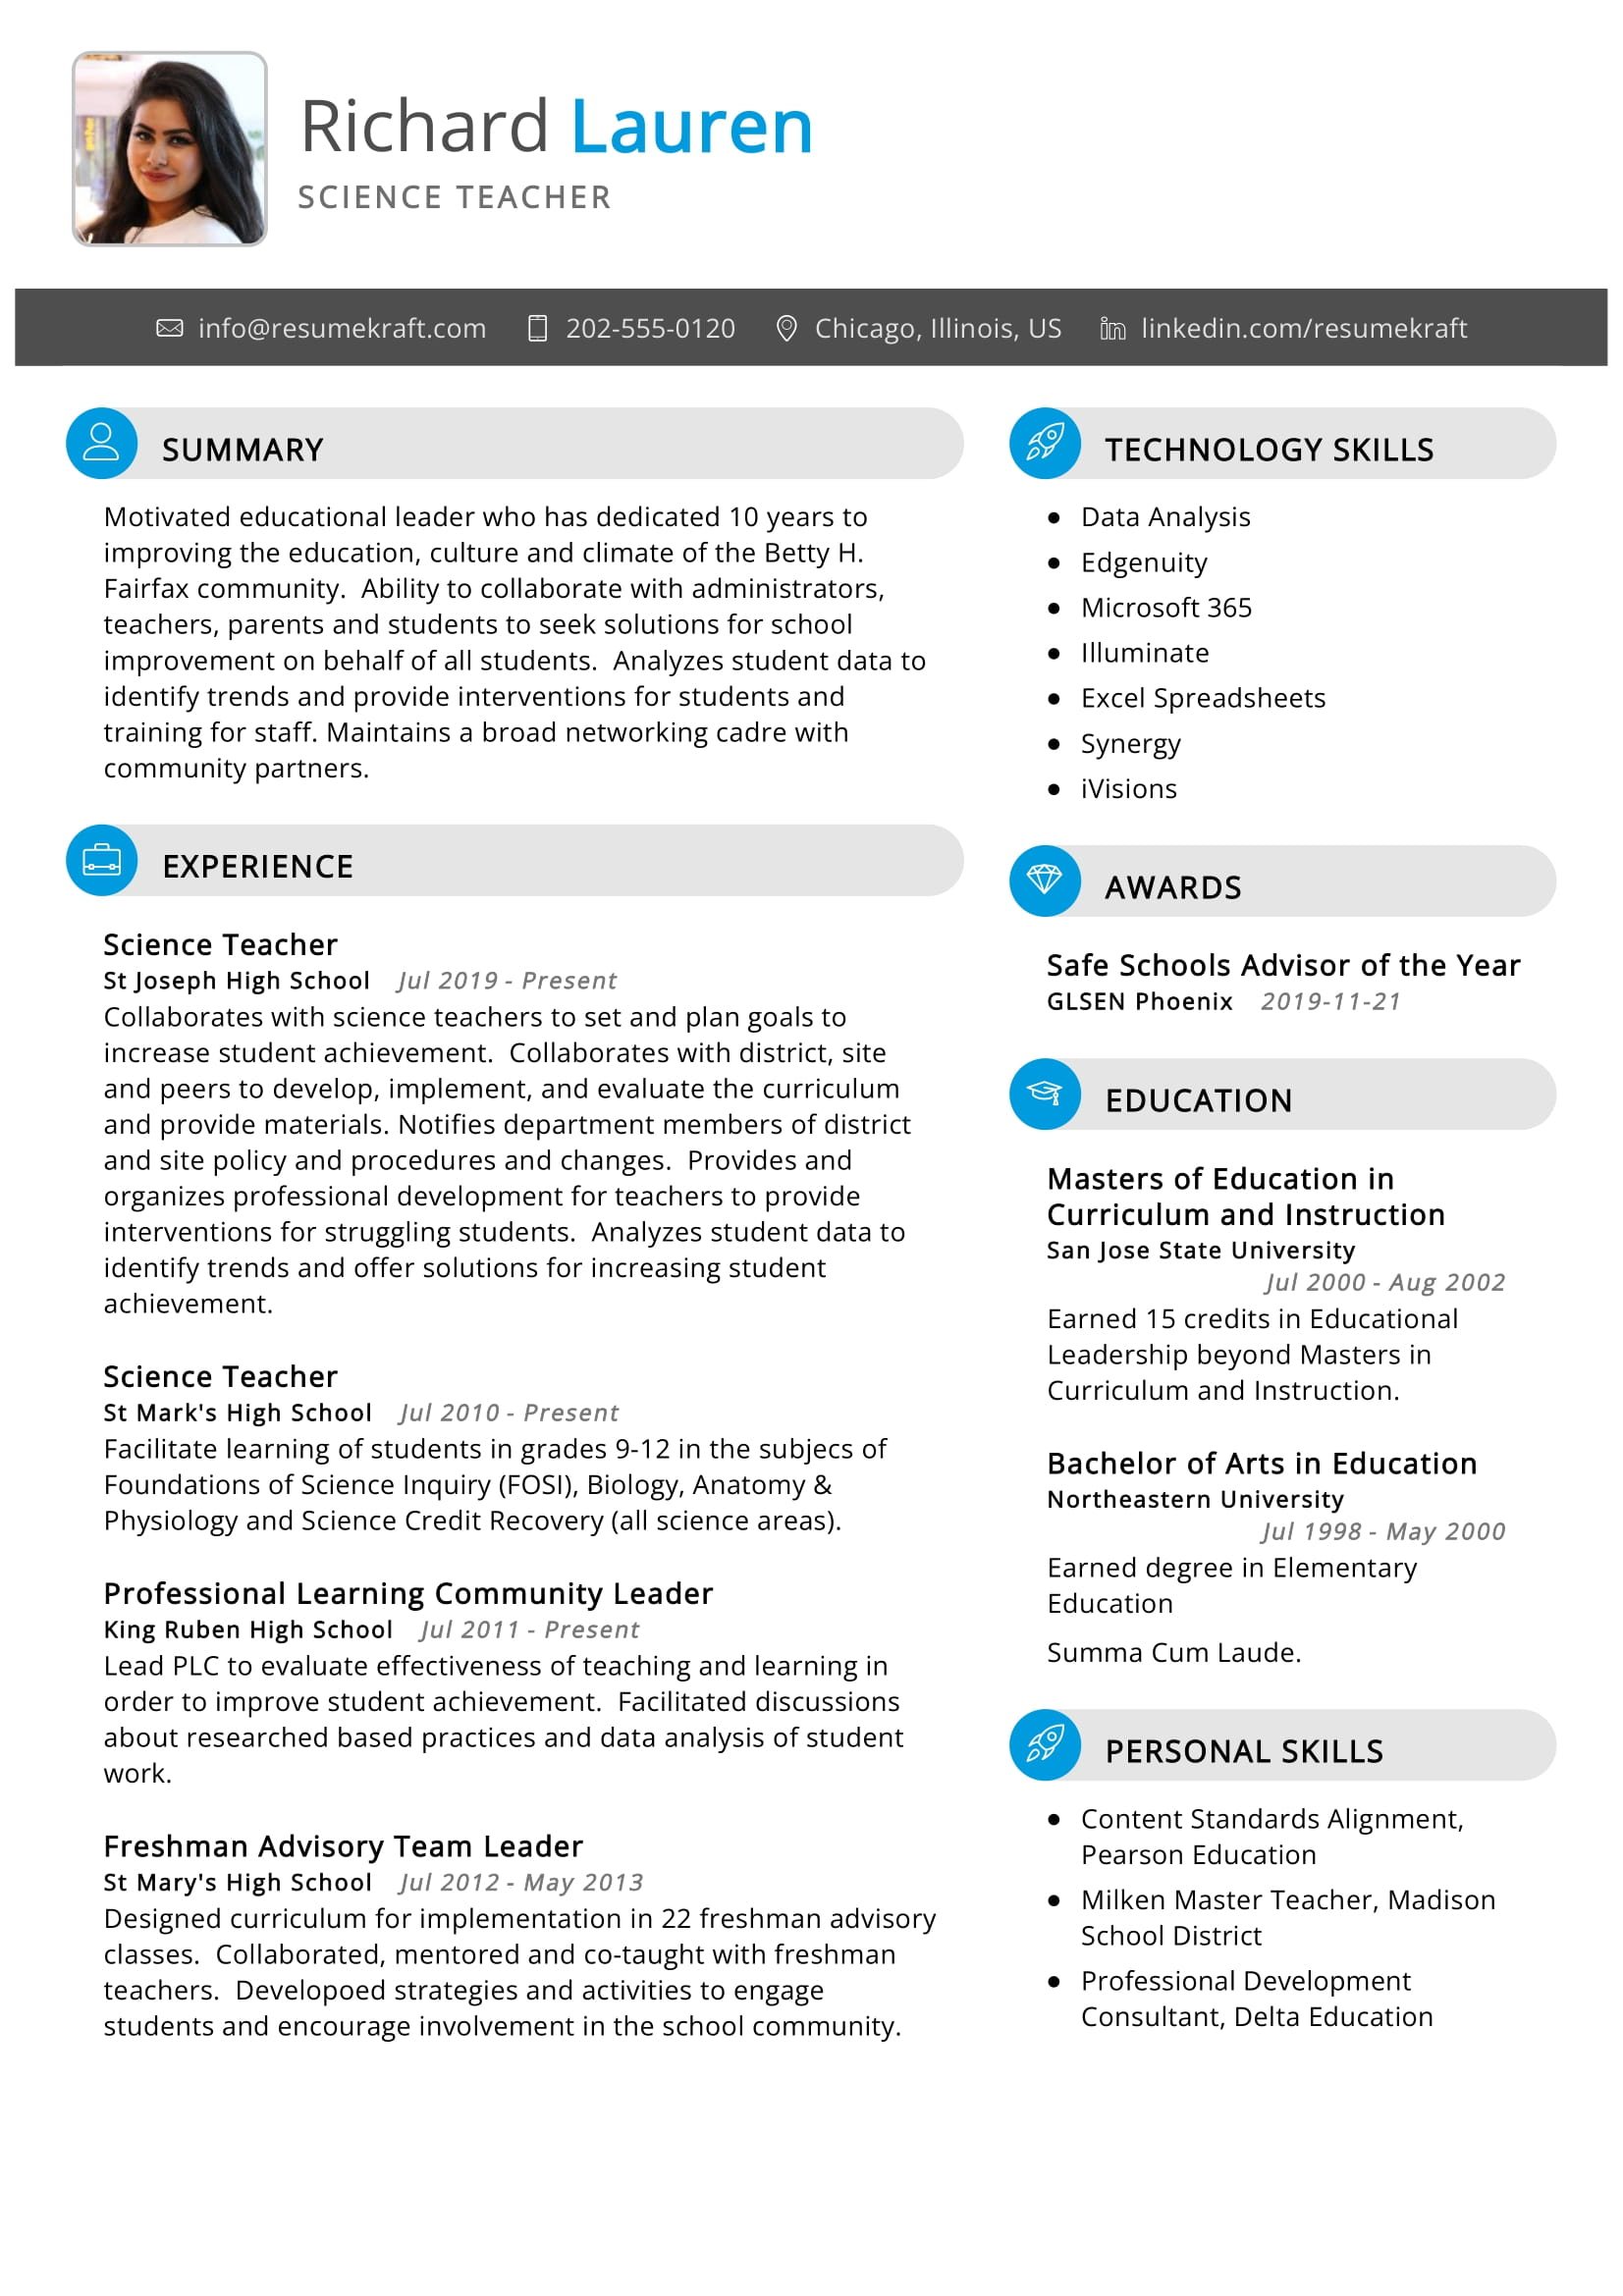 Teacher Resume Format A Guide for Fresher and Experienced Teachers